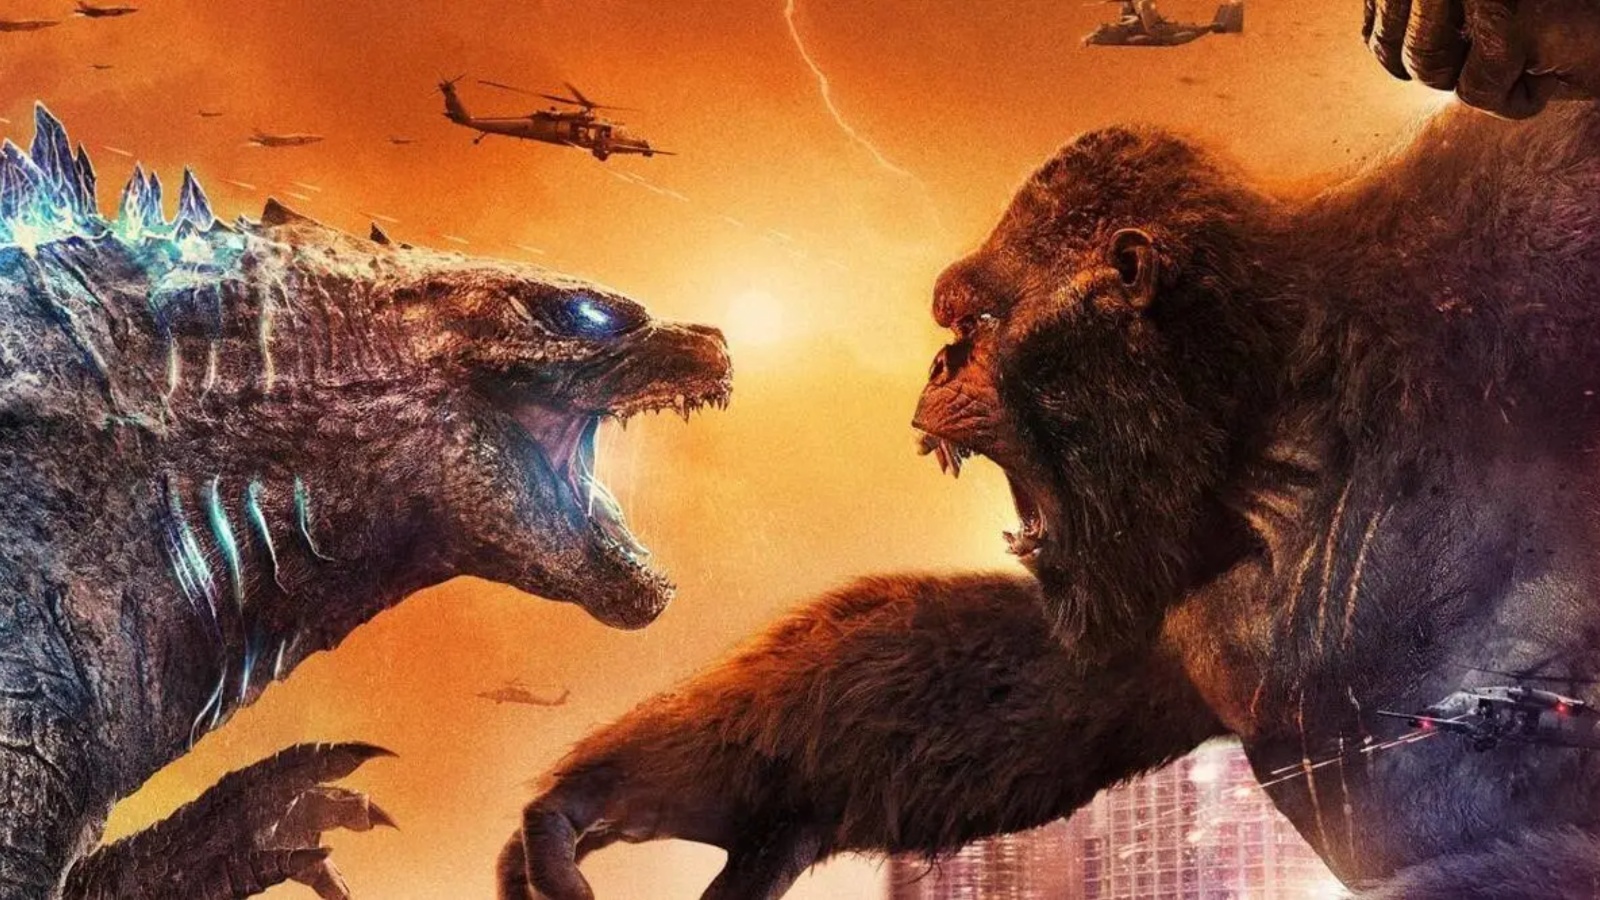 android, godzilla x kong enters rs 100 cr club in india, is now among 15 highest-grossing hollywood films of all time in the country; see the rest here